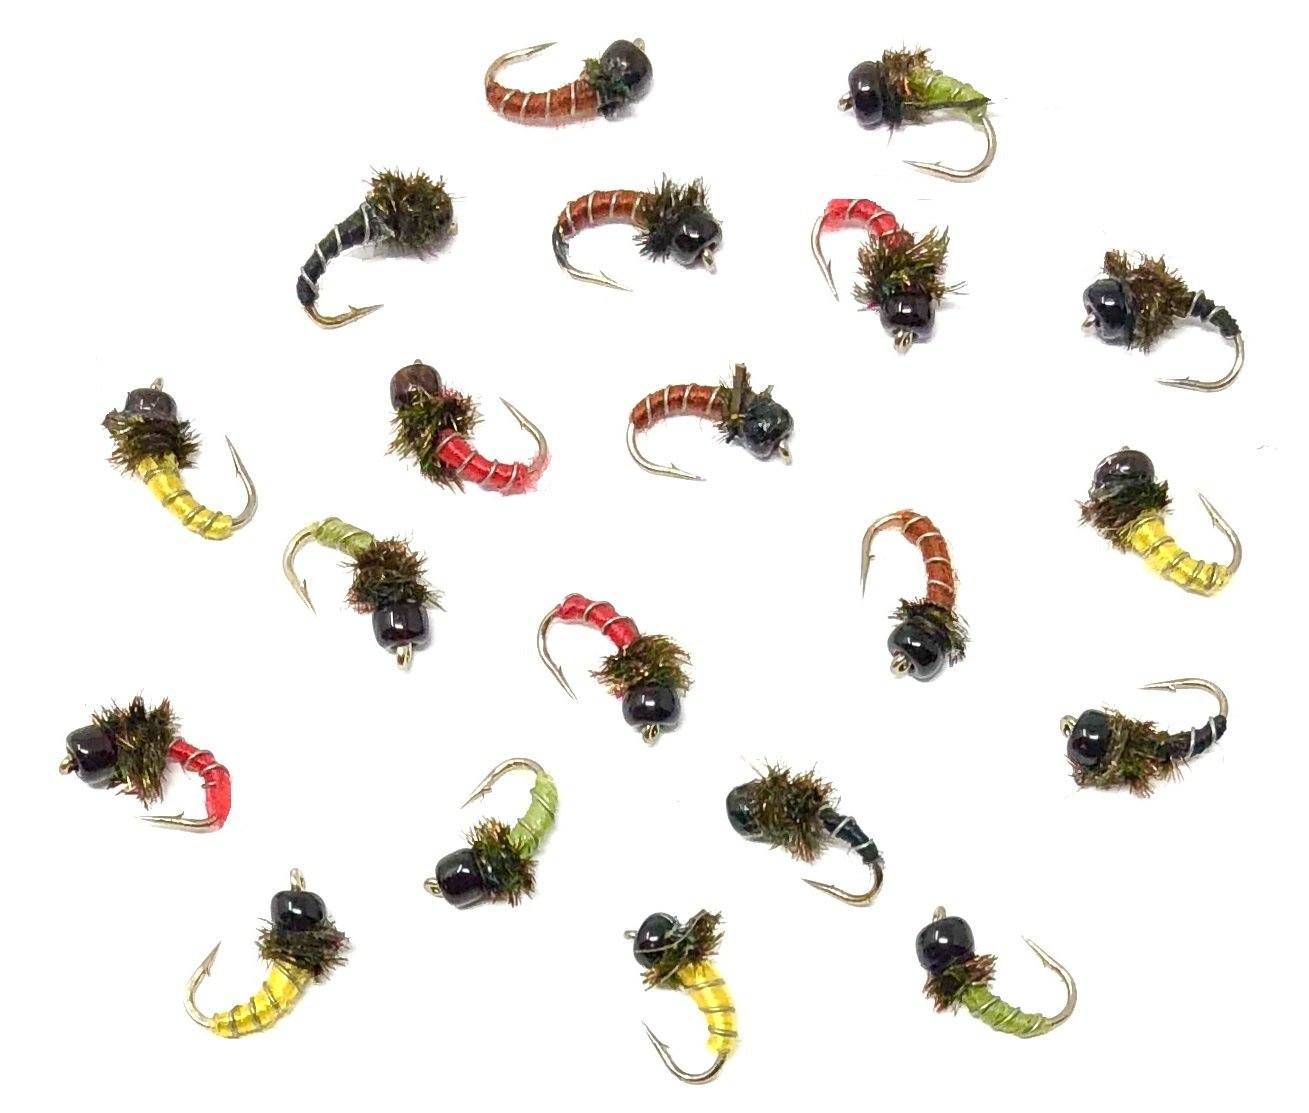 Midge and Emerger Flies Jumbo Juju Chironomid Fly Pattern Fly Fishing Flies  for Fly Fishing 3 Pack of Premium Trout Flies 